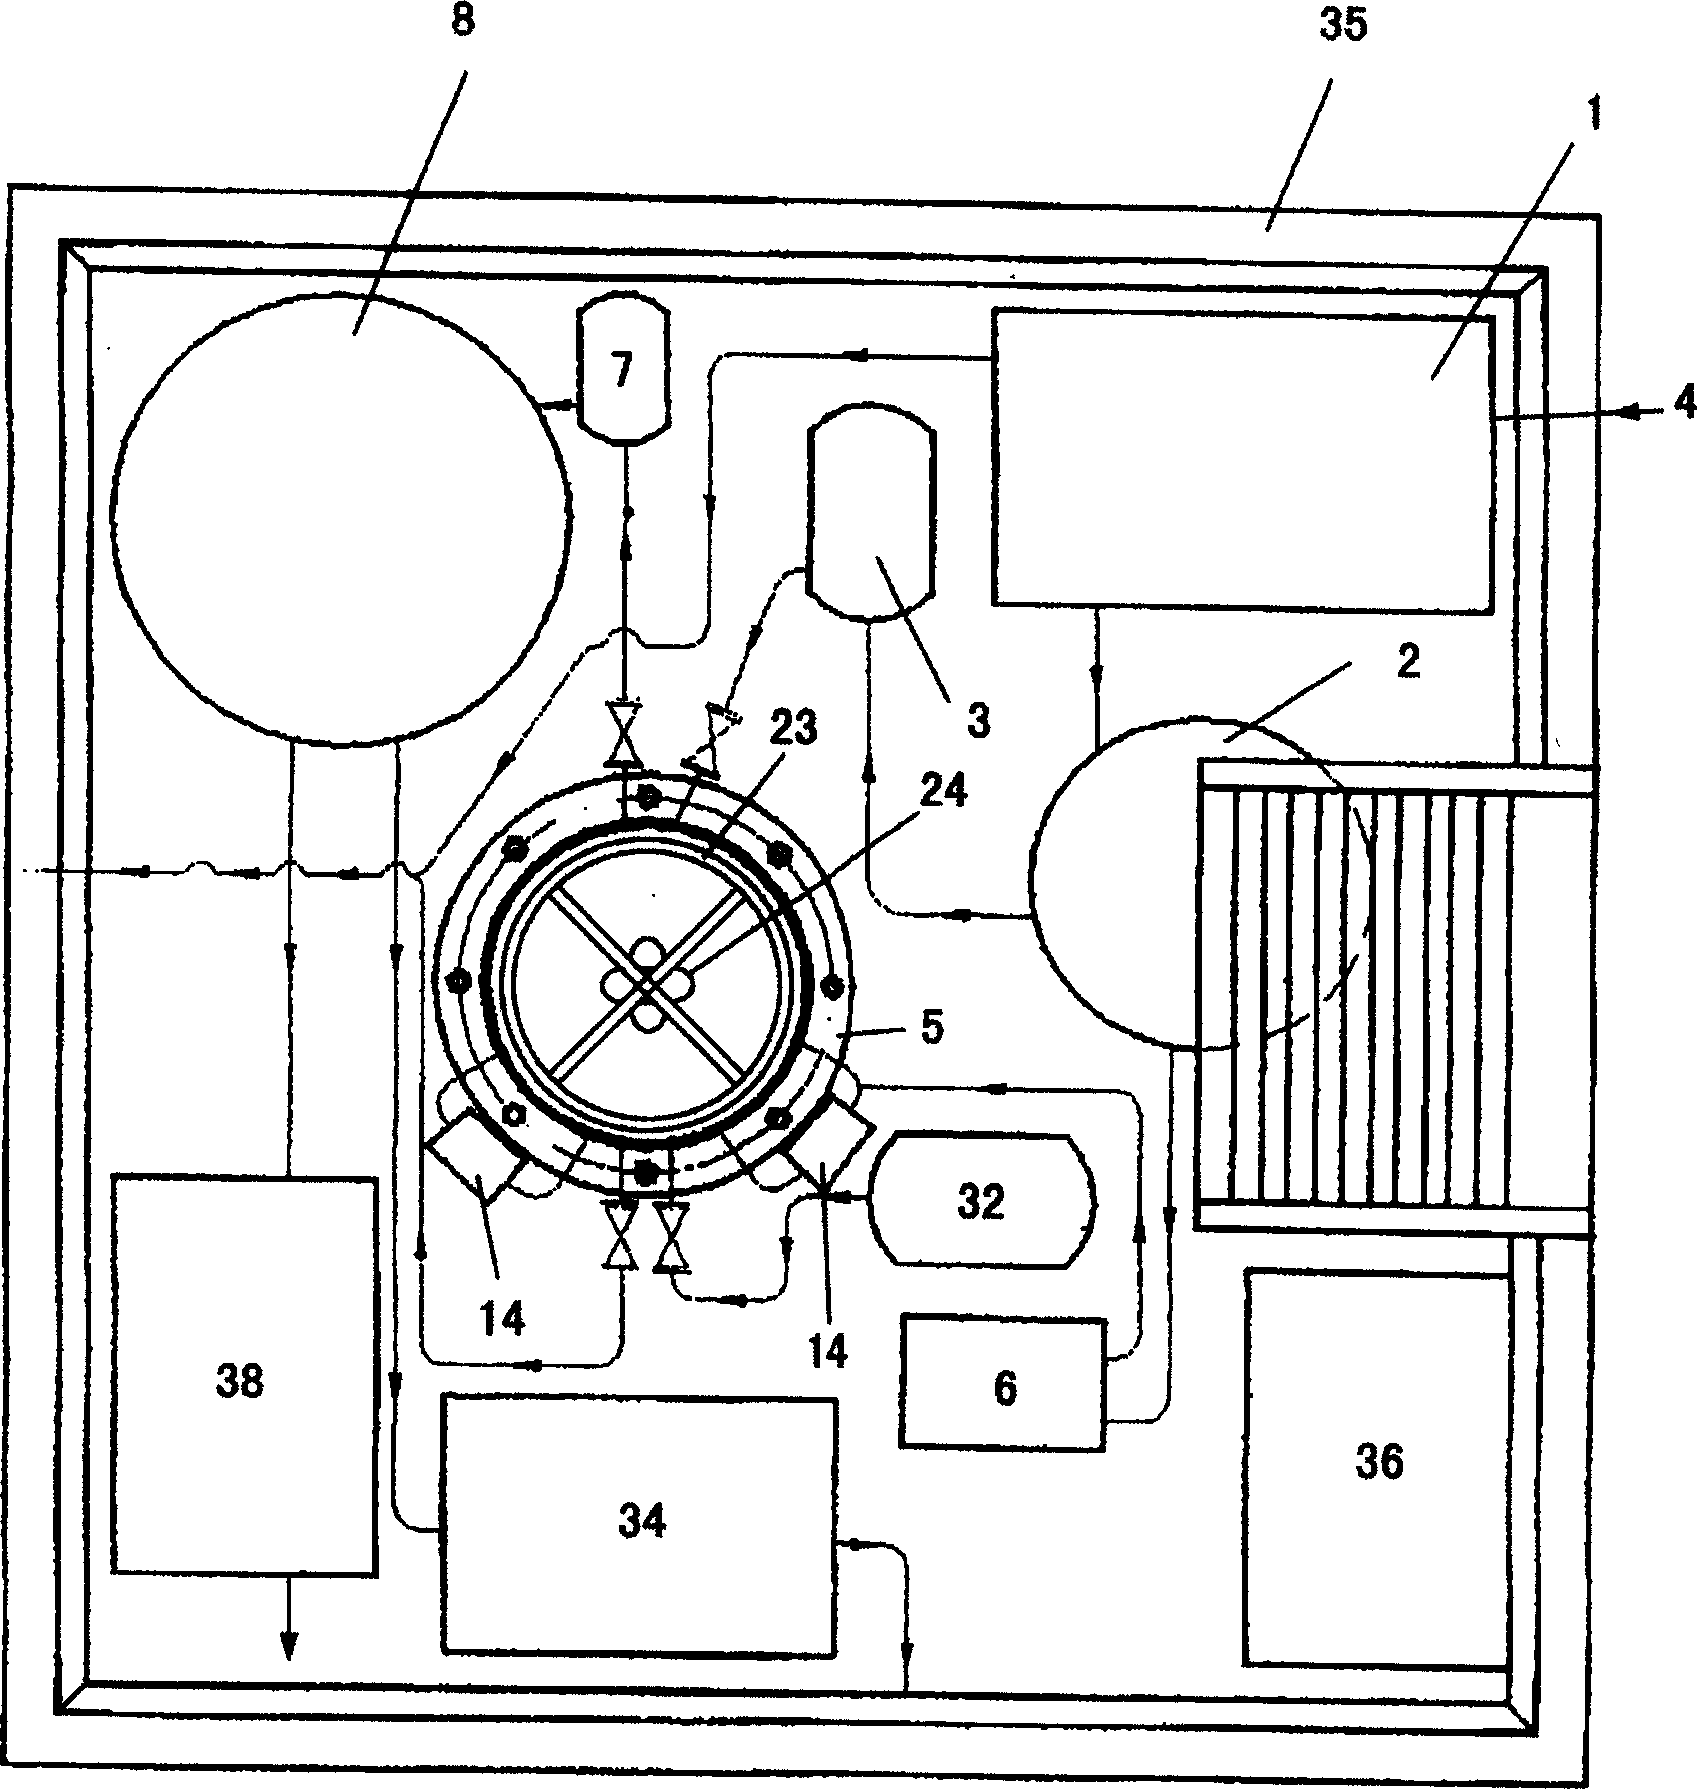 A process for extraction and apparatus thereof